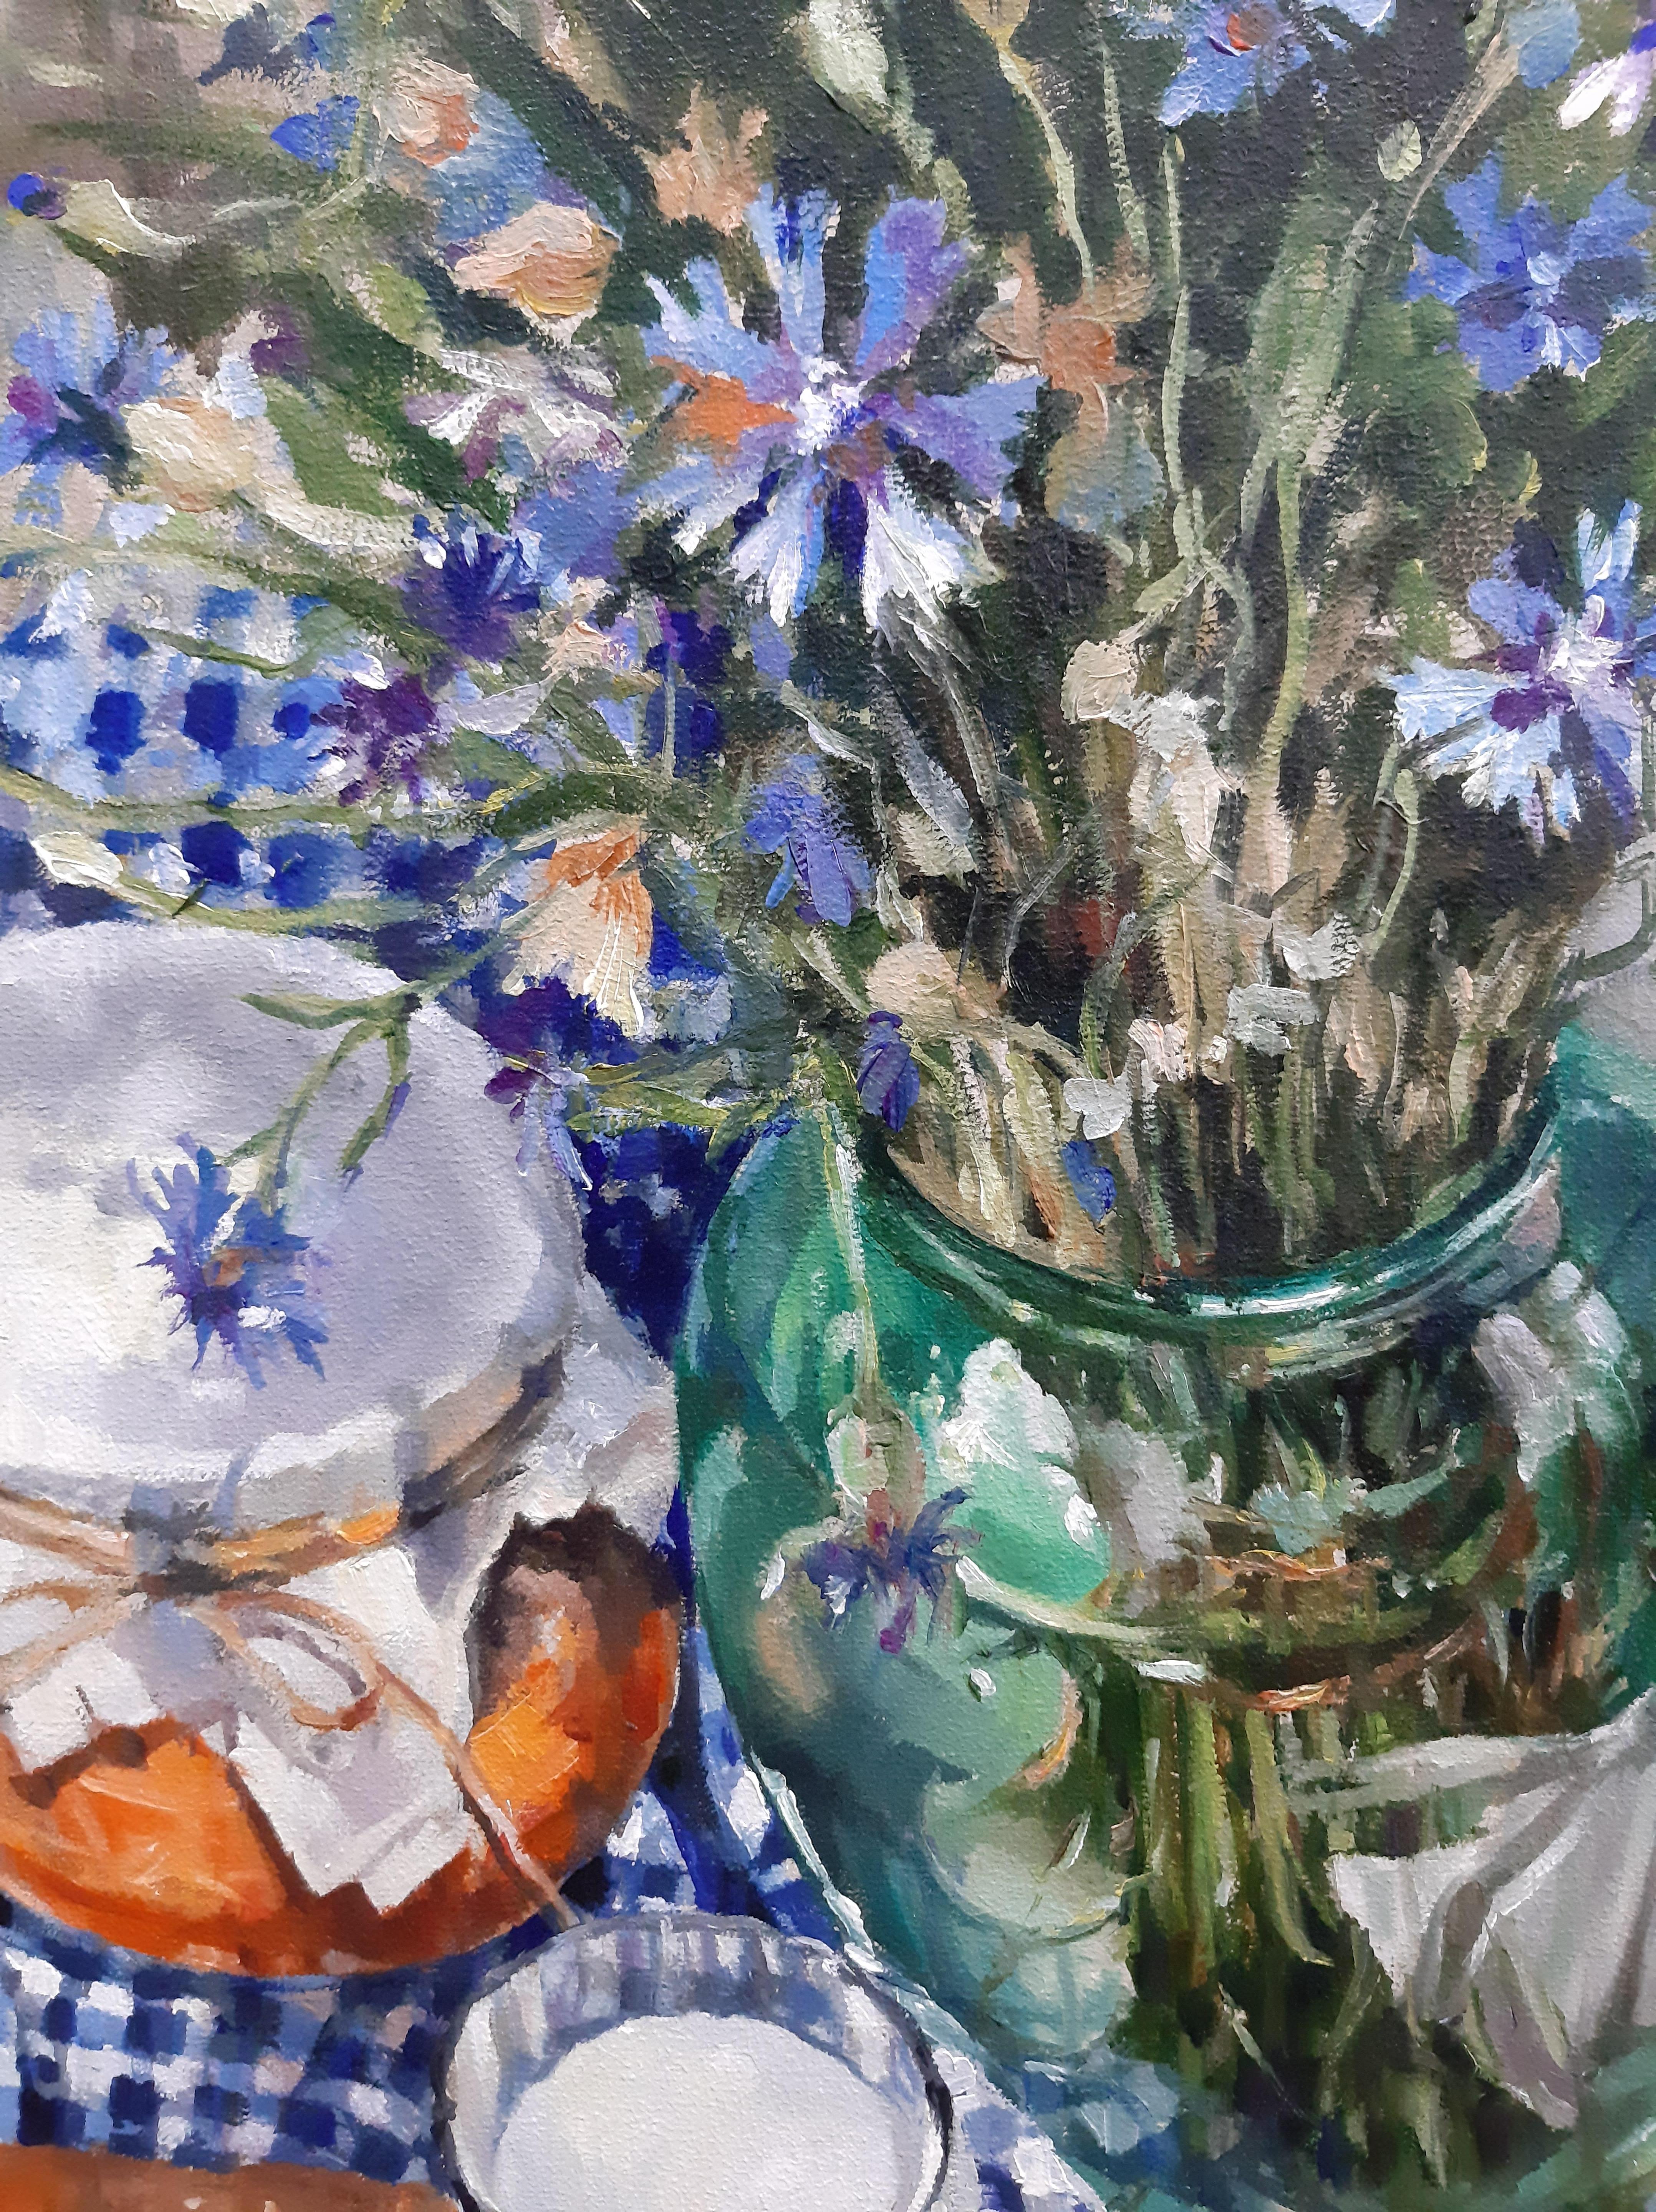 Corn Flowers - Still Life Painting Colors Blue White Green Red - Gray Still-Life Painting by Marina Dobrovolskaya